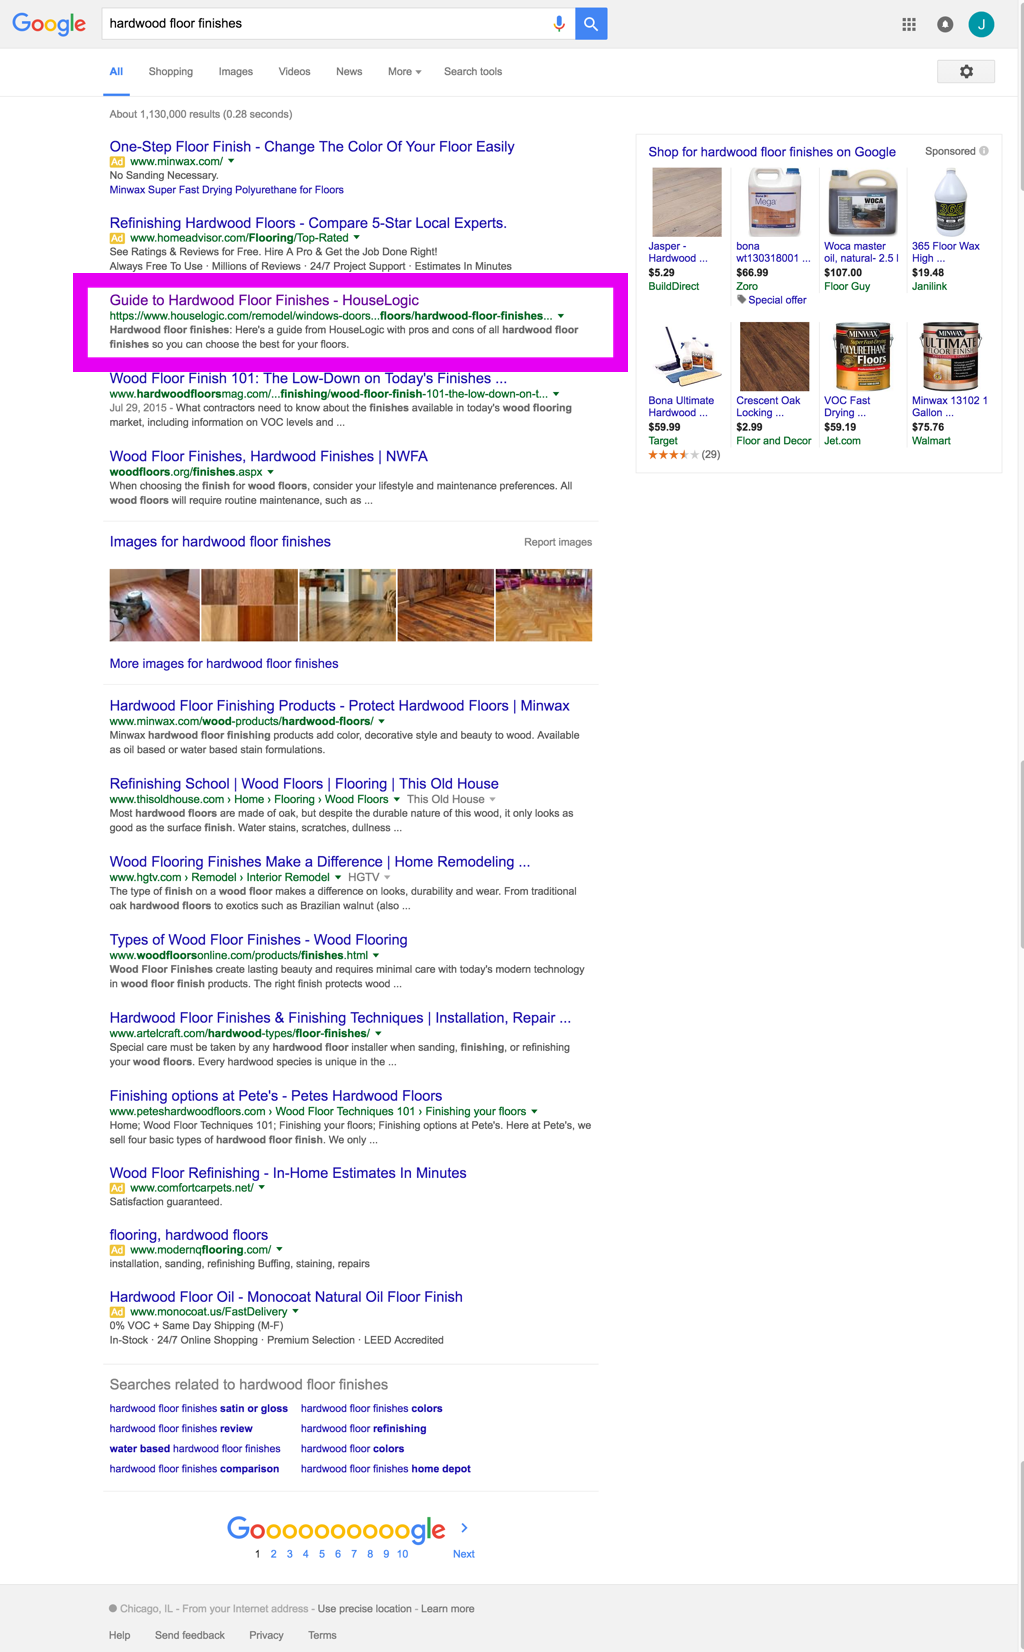 search results - hardwood floor finishes